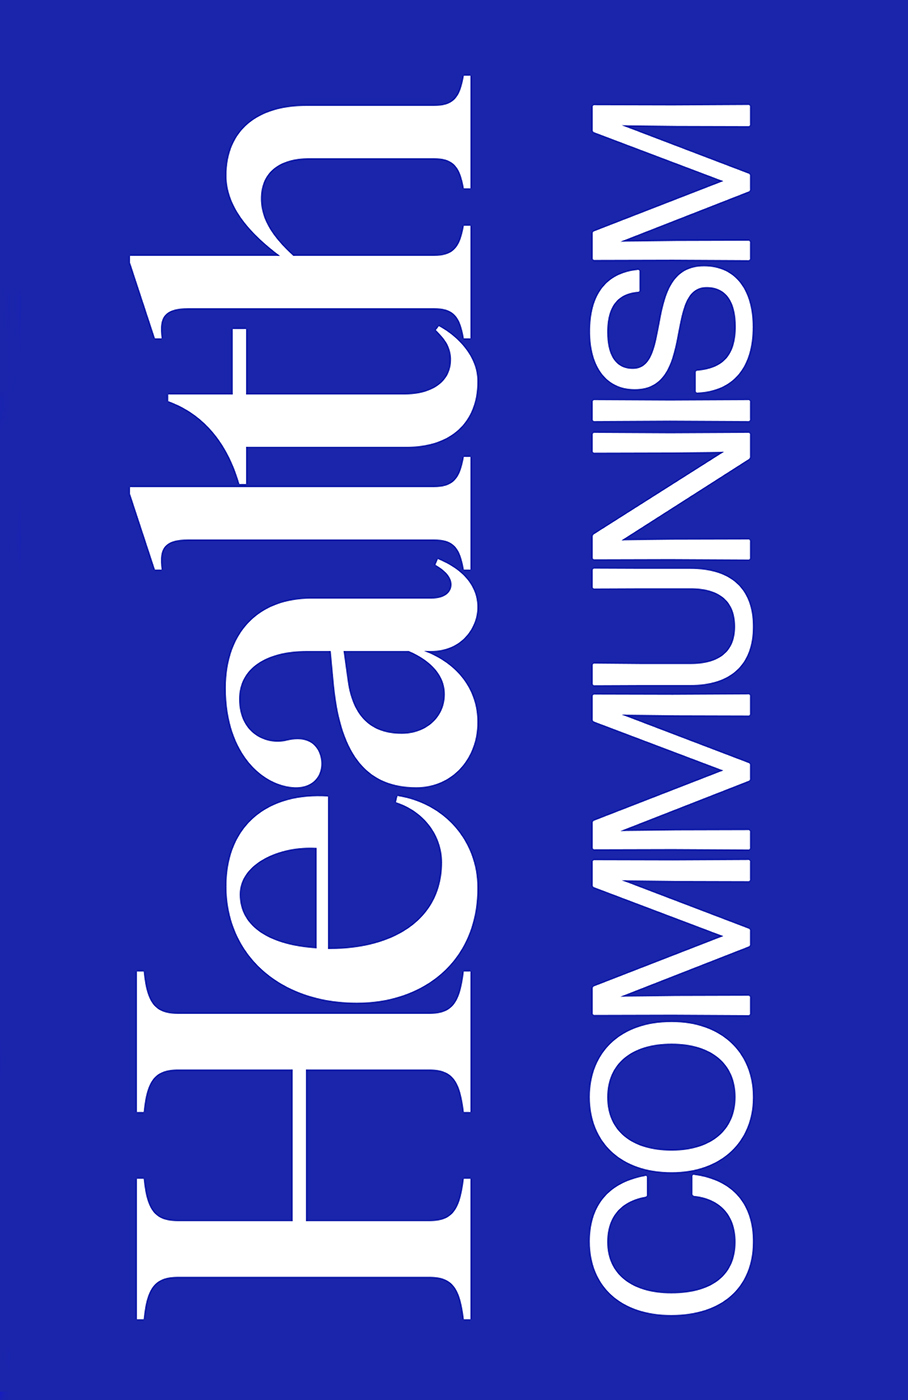 Health Communism cover. Large text reading Health Communism in white lettering against a solid dark blue background